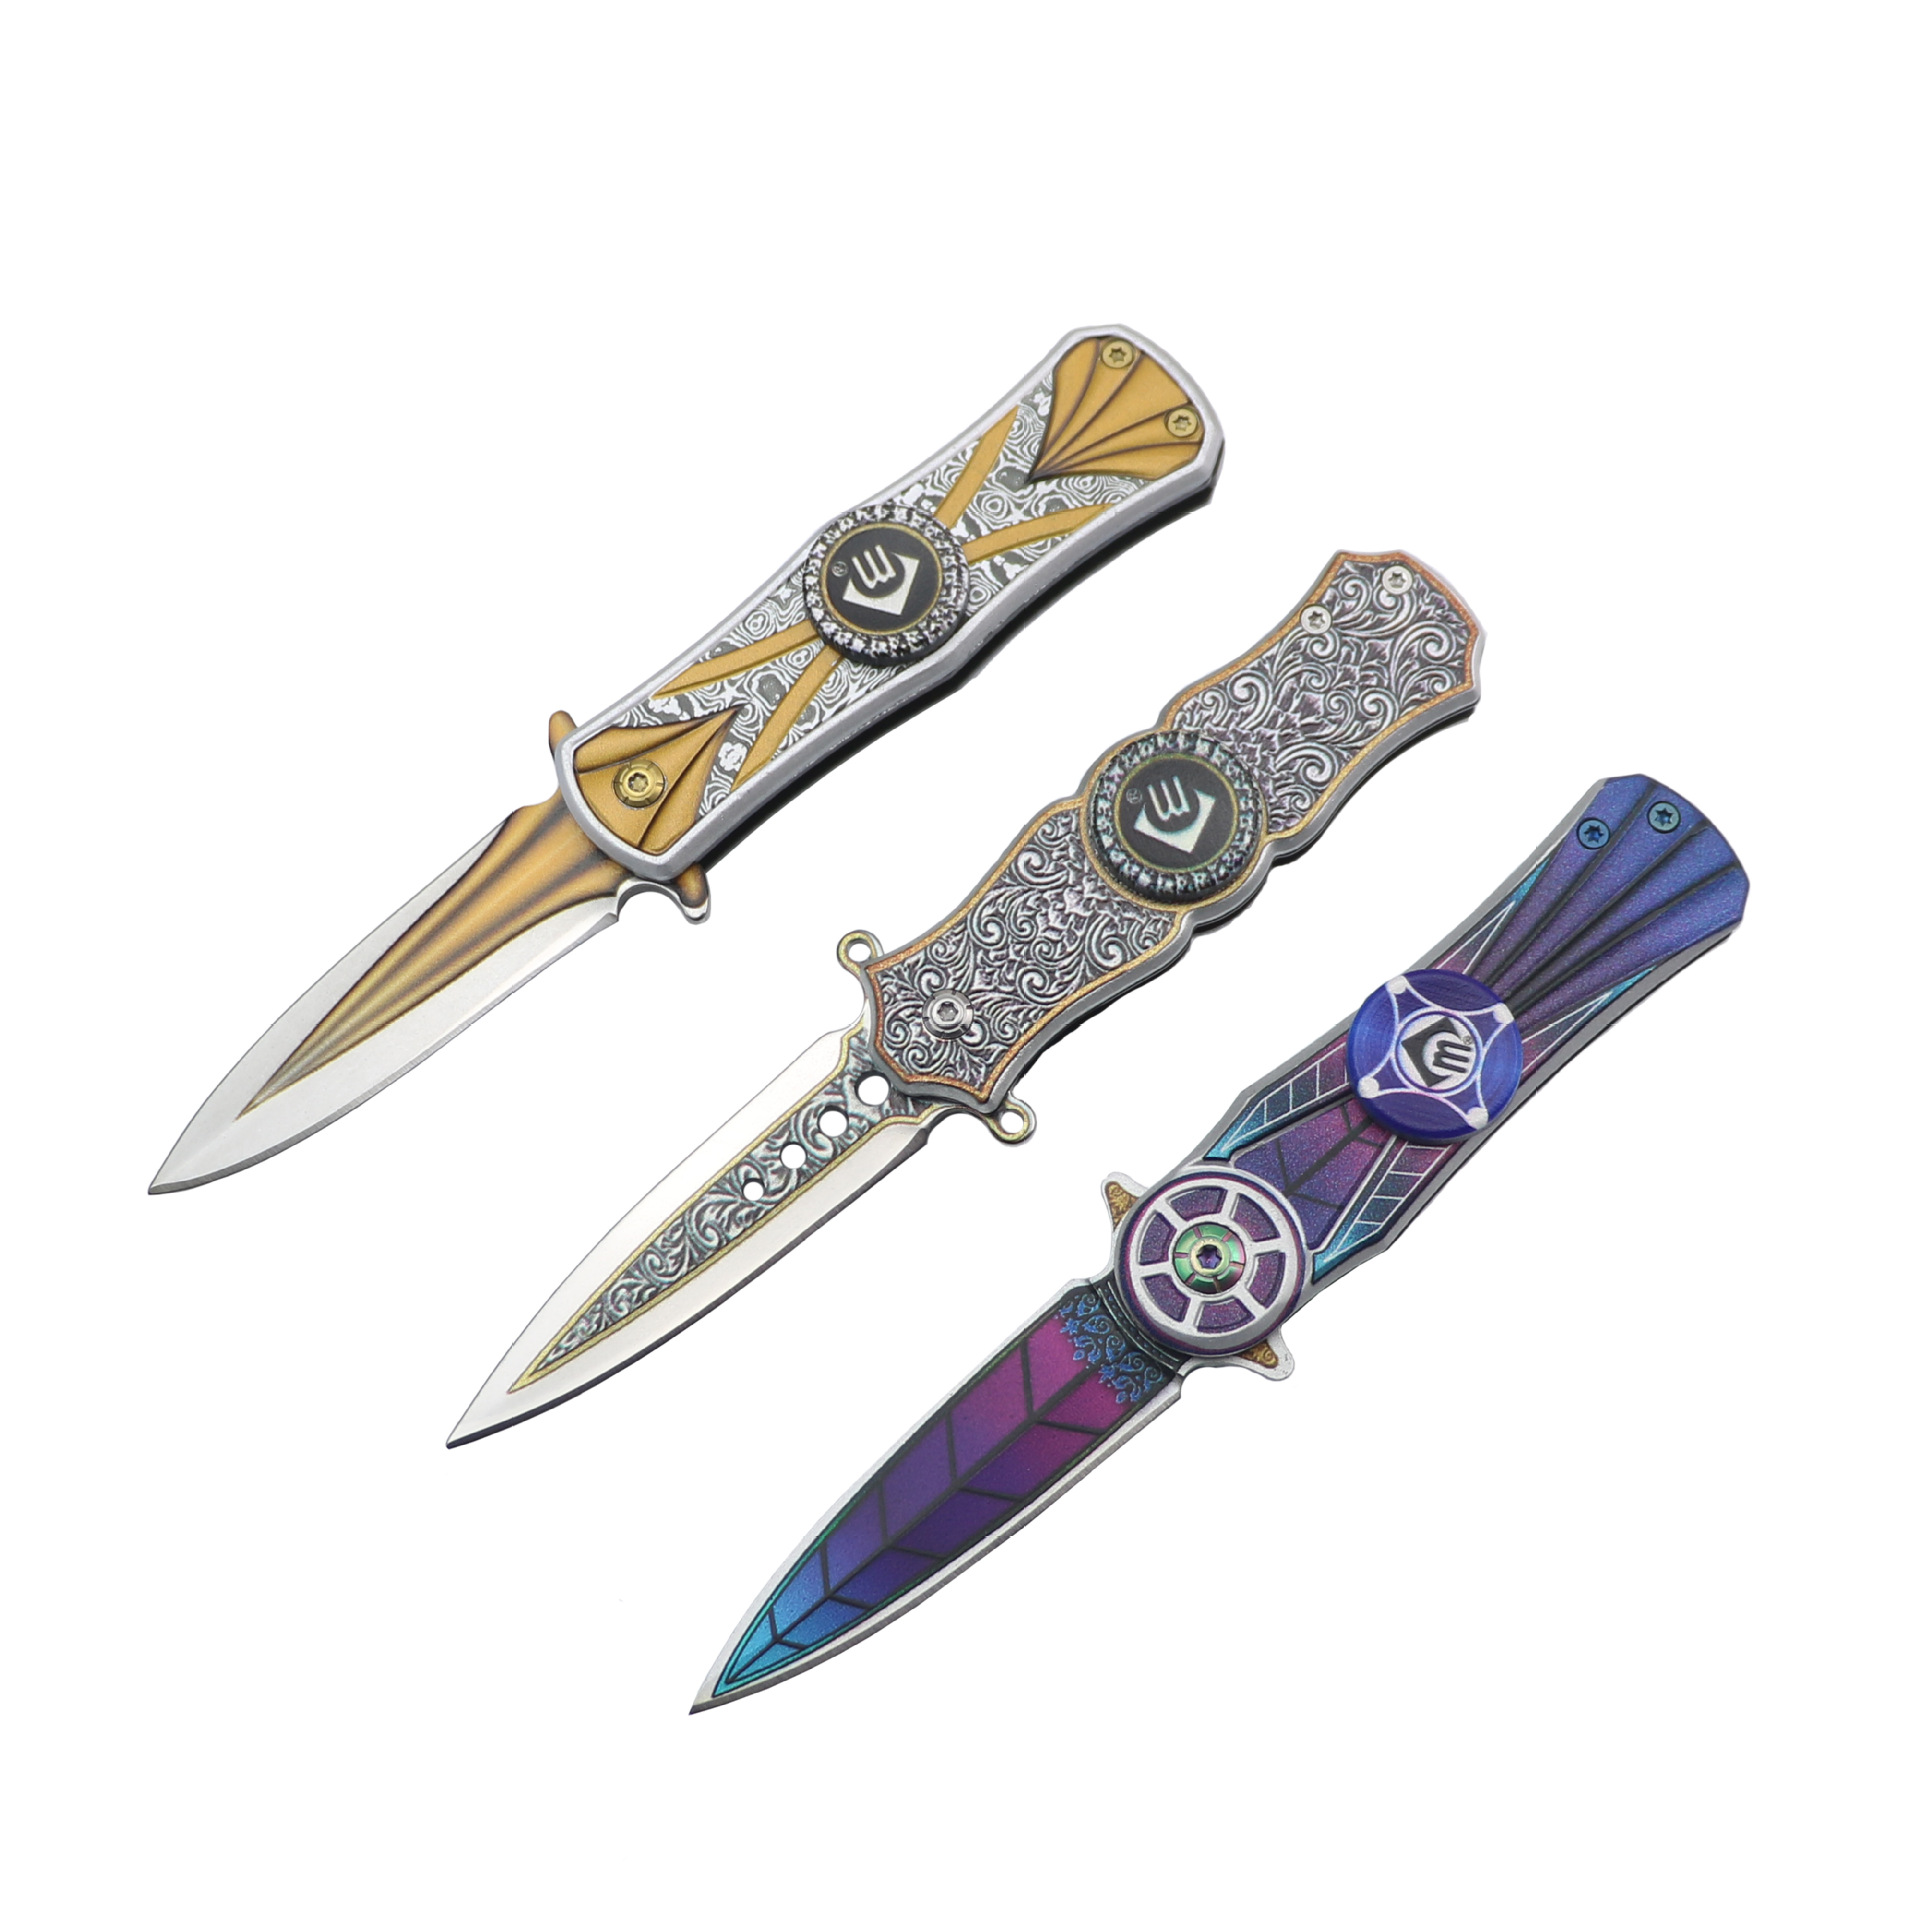 

gift CHONG MING CM76 three styles camping A fidget spinner toy knife 440C blade color box outdoor EDC tools wholesale price